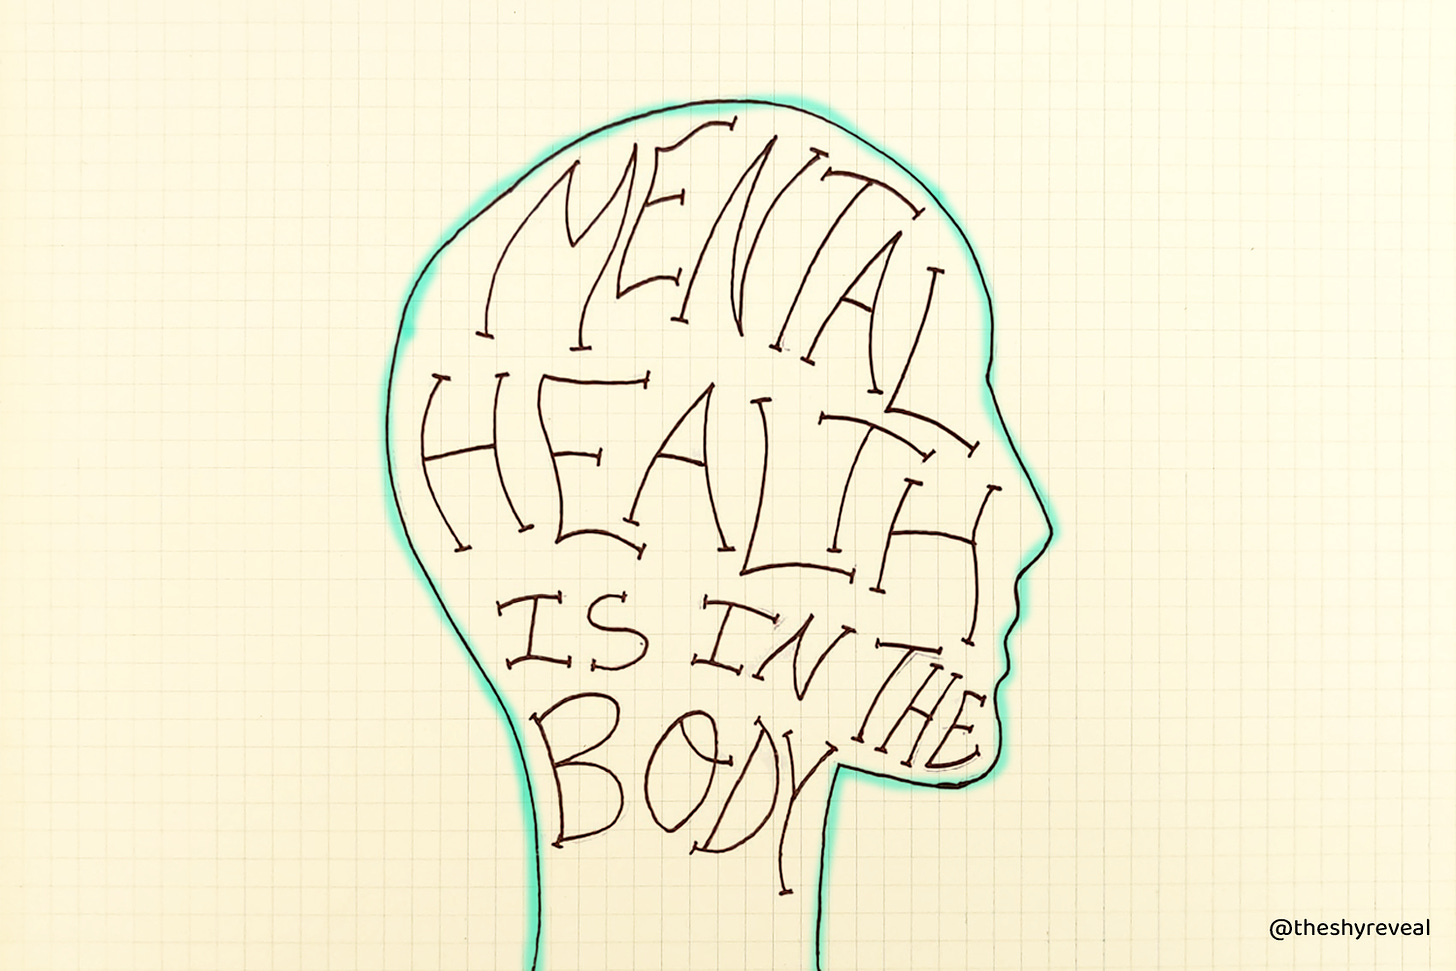 Drawing of a head silhouette with the words "Mental health is in the body" inside.